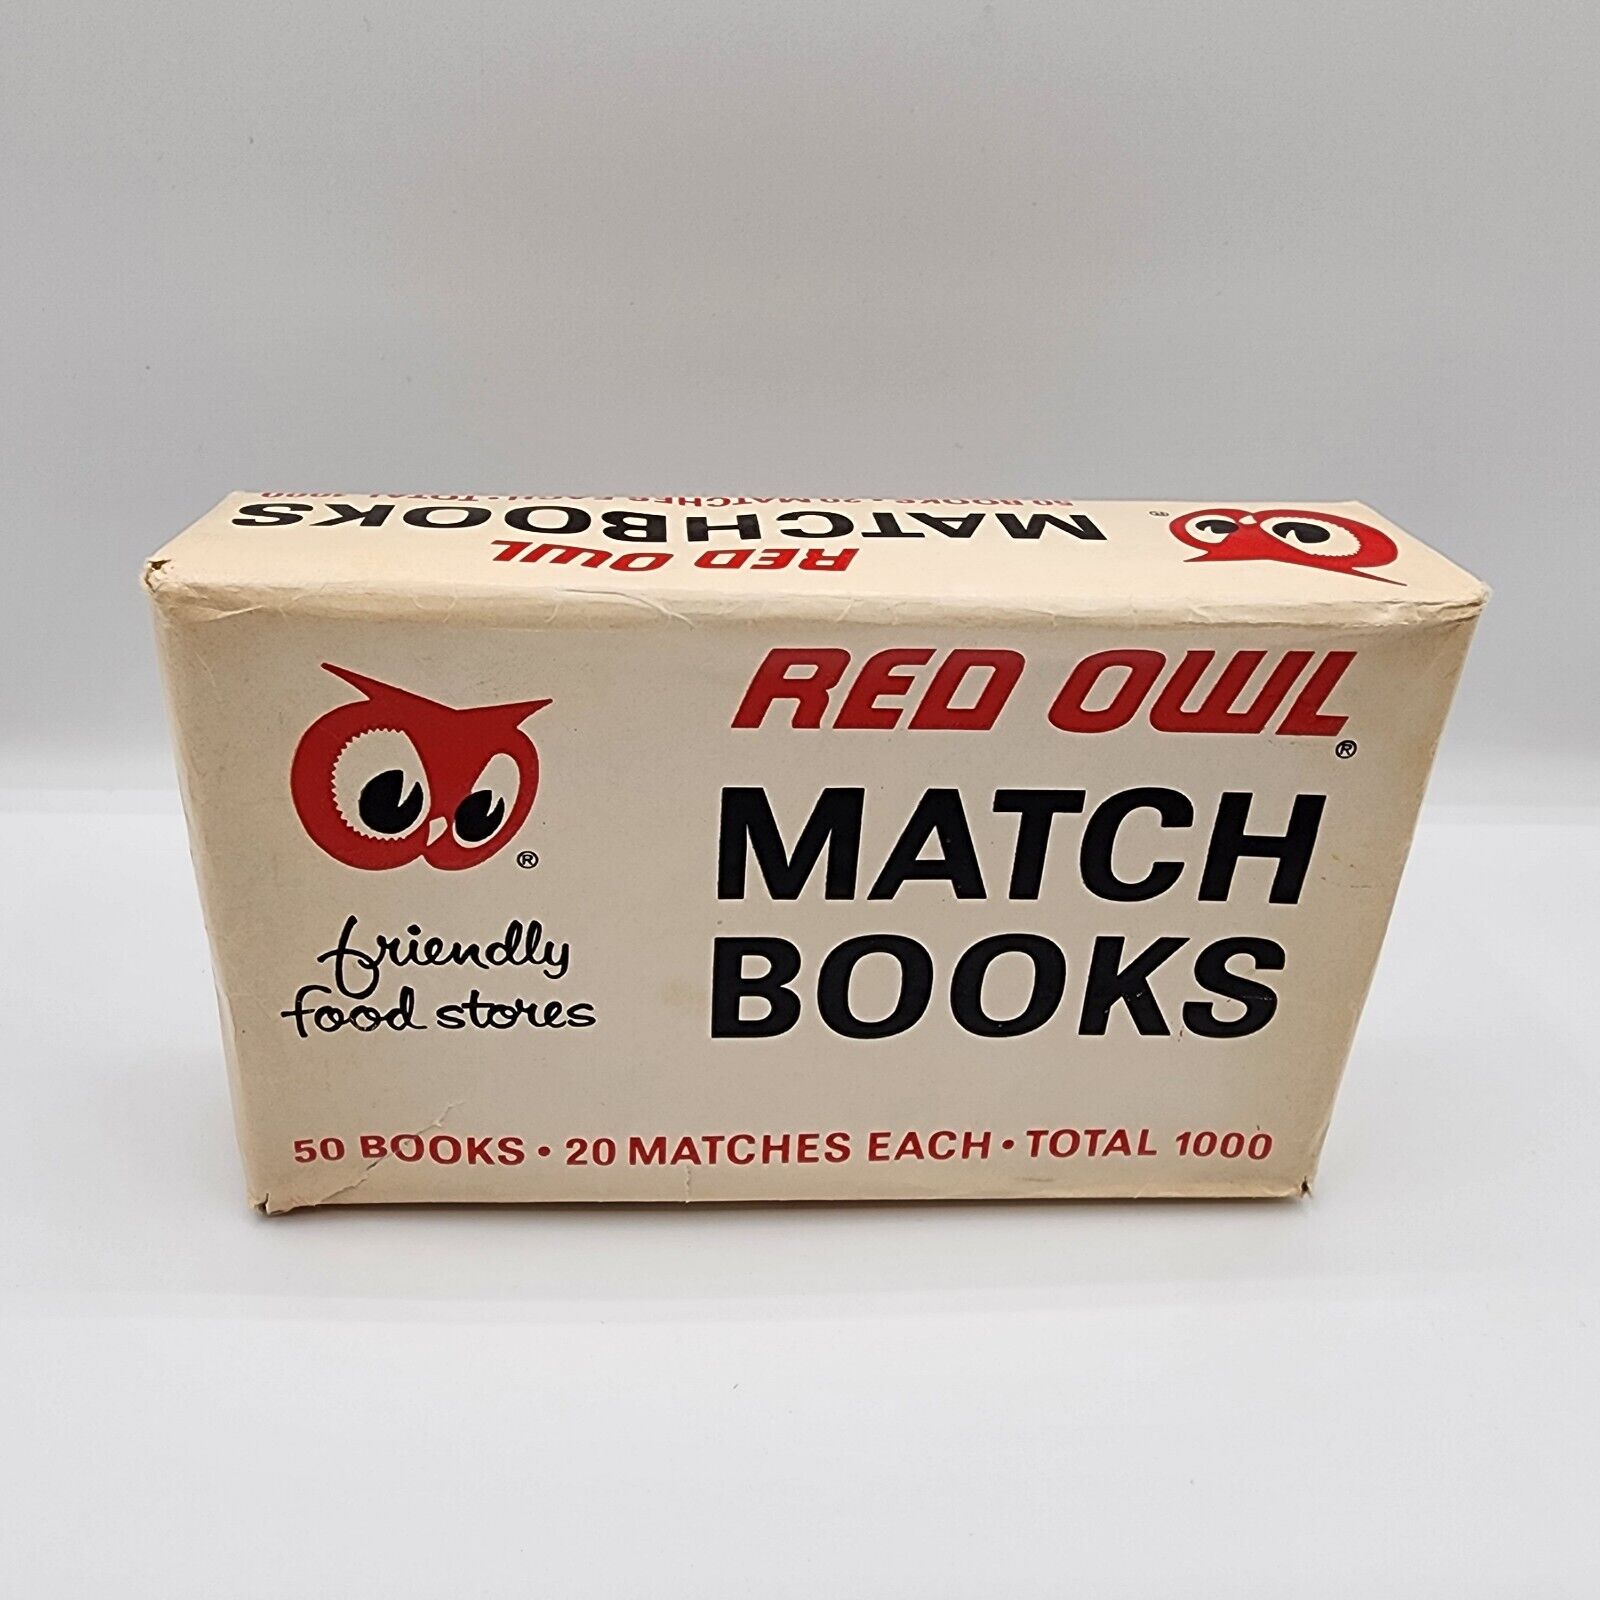 Vintage Red Owl Grocery Food Store Match Books Box